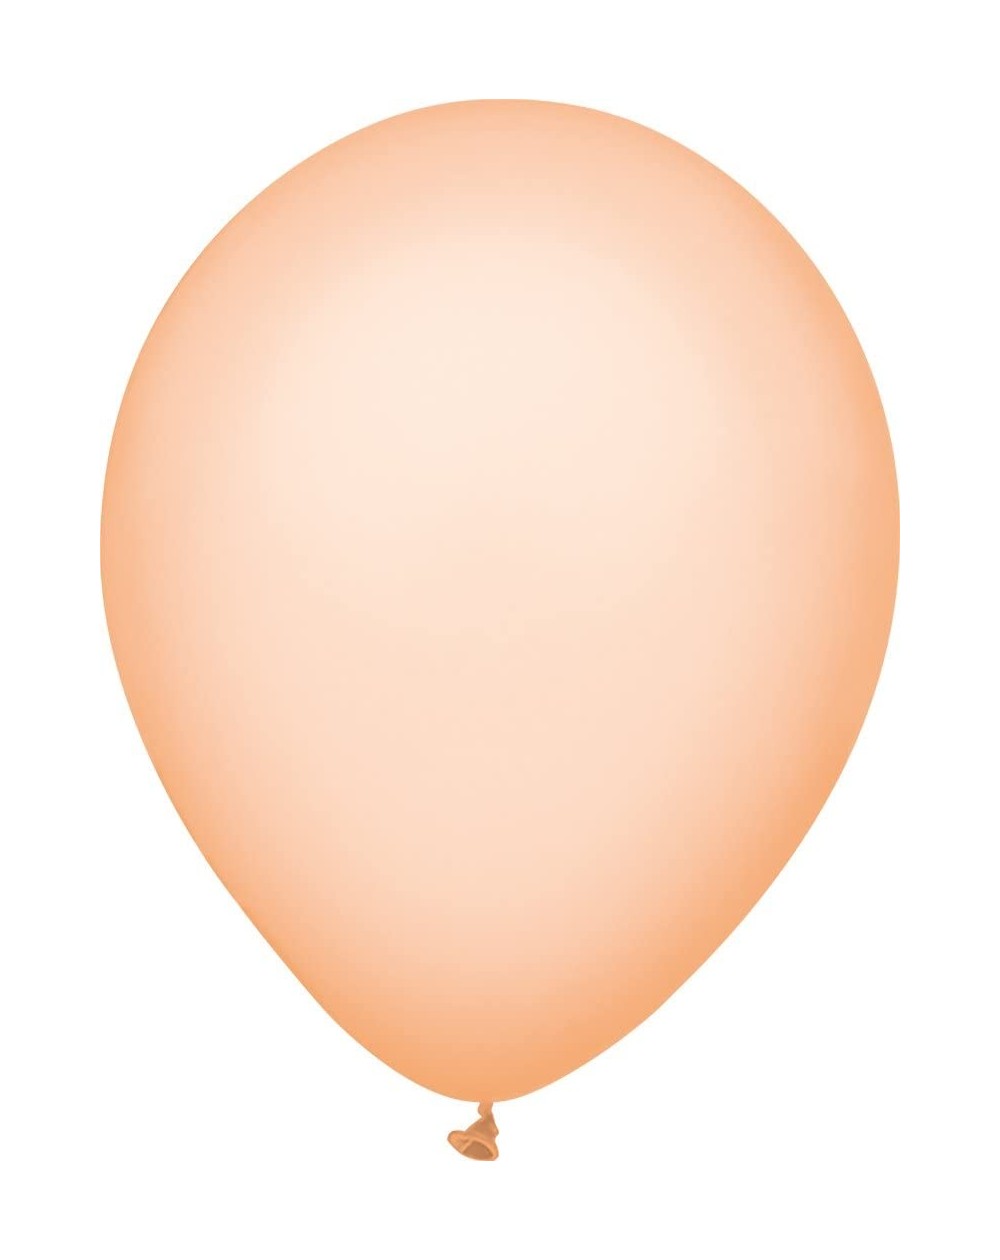 Balloons 76537 Made in the USA Neon Color 12-Inch Latex Balloons- 72-Count- Orange - Neon Orange - C017Z2ED70X $14.23